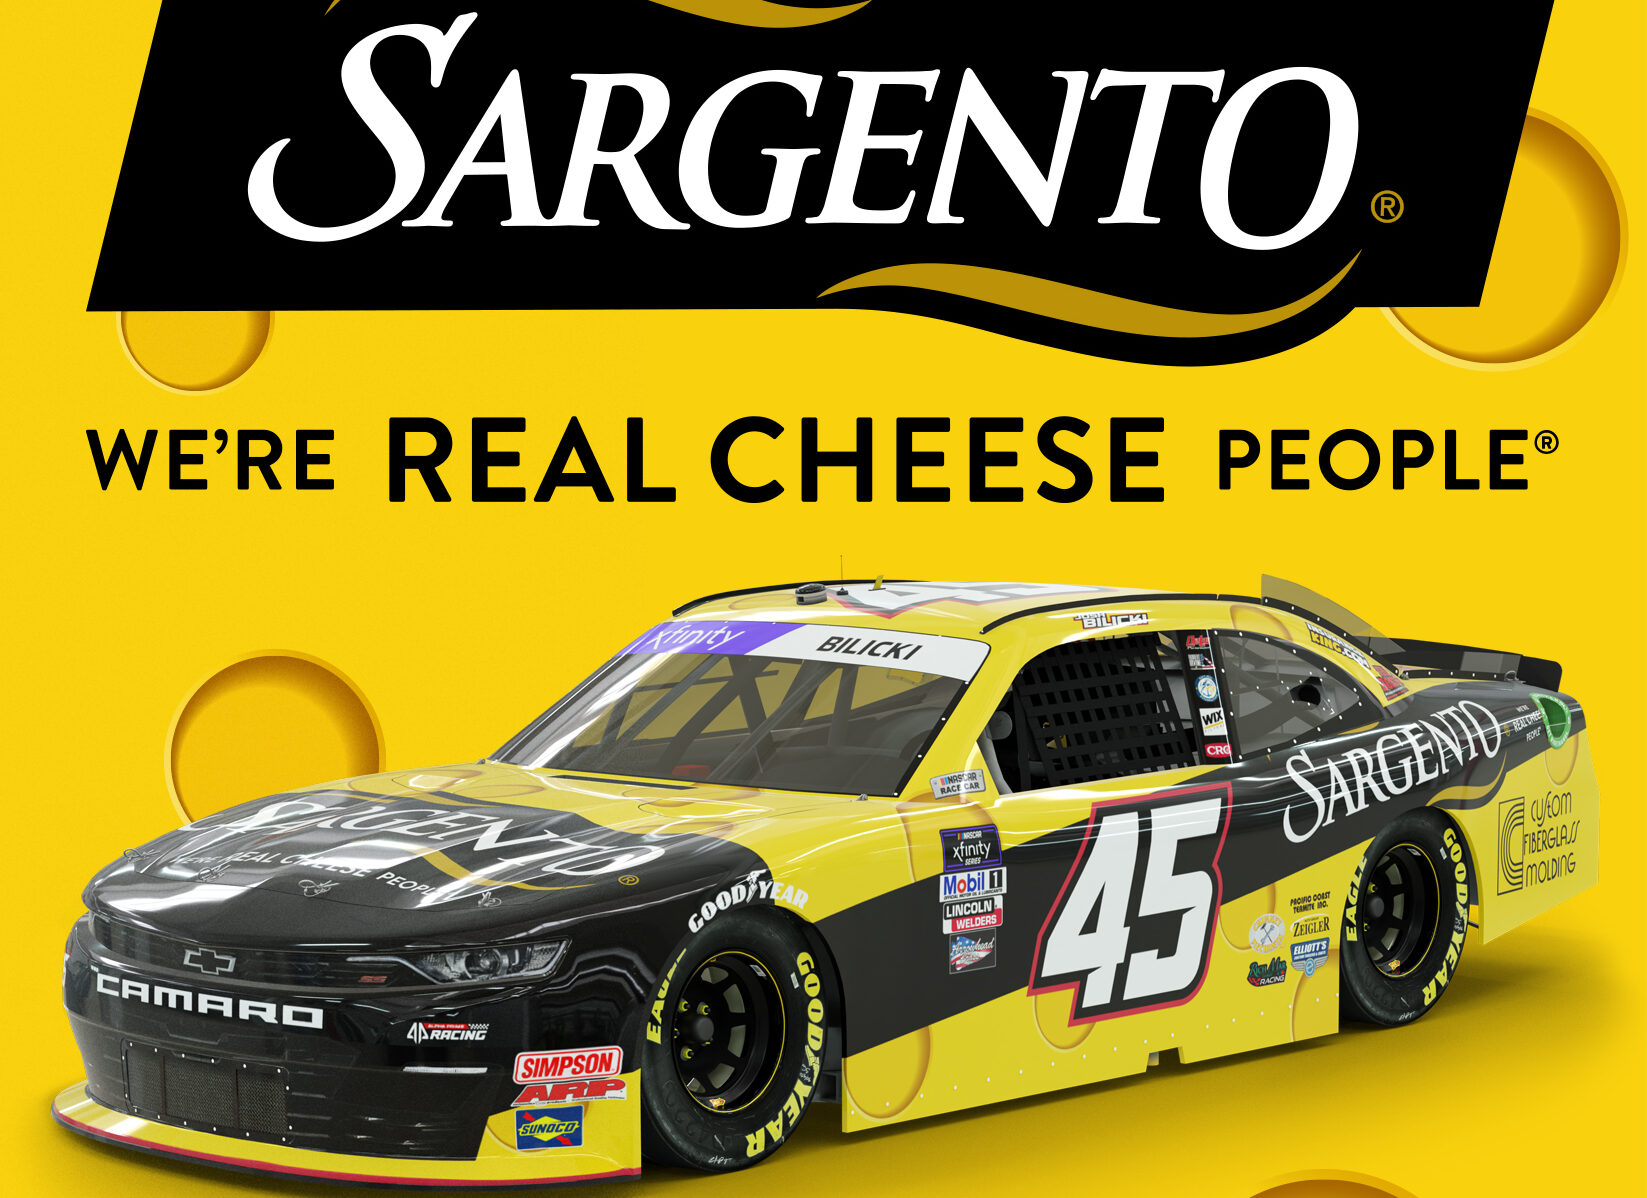 Sargento Foods Inc. Teams Up with NASCAR Driver Josh Bilicki After He Collided with Sargento Signage During a Recent Race in Wisconsin